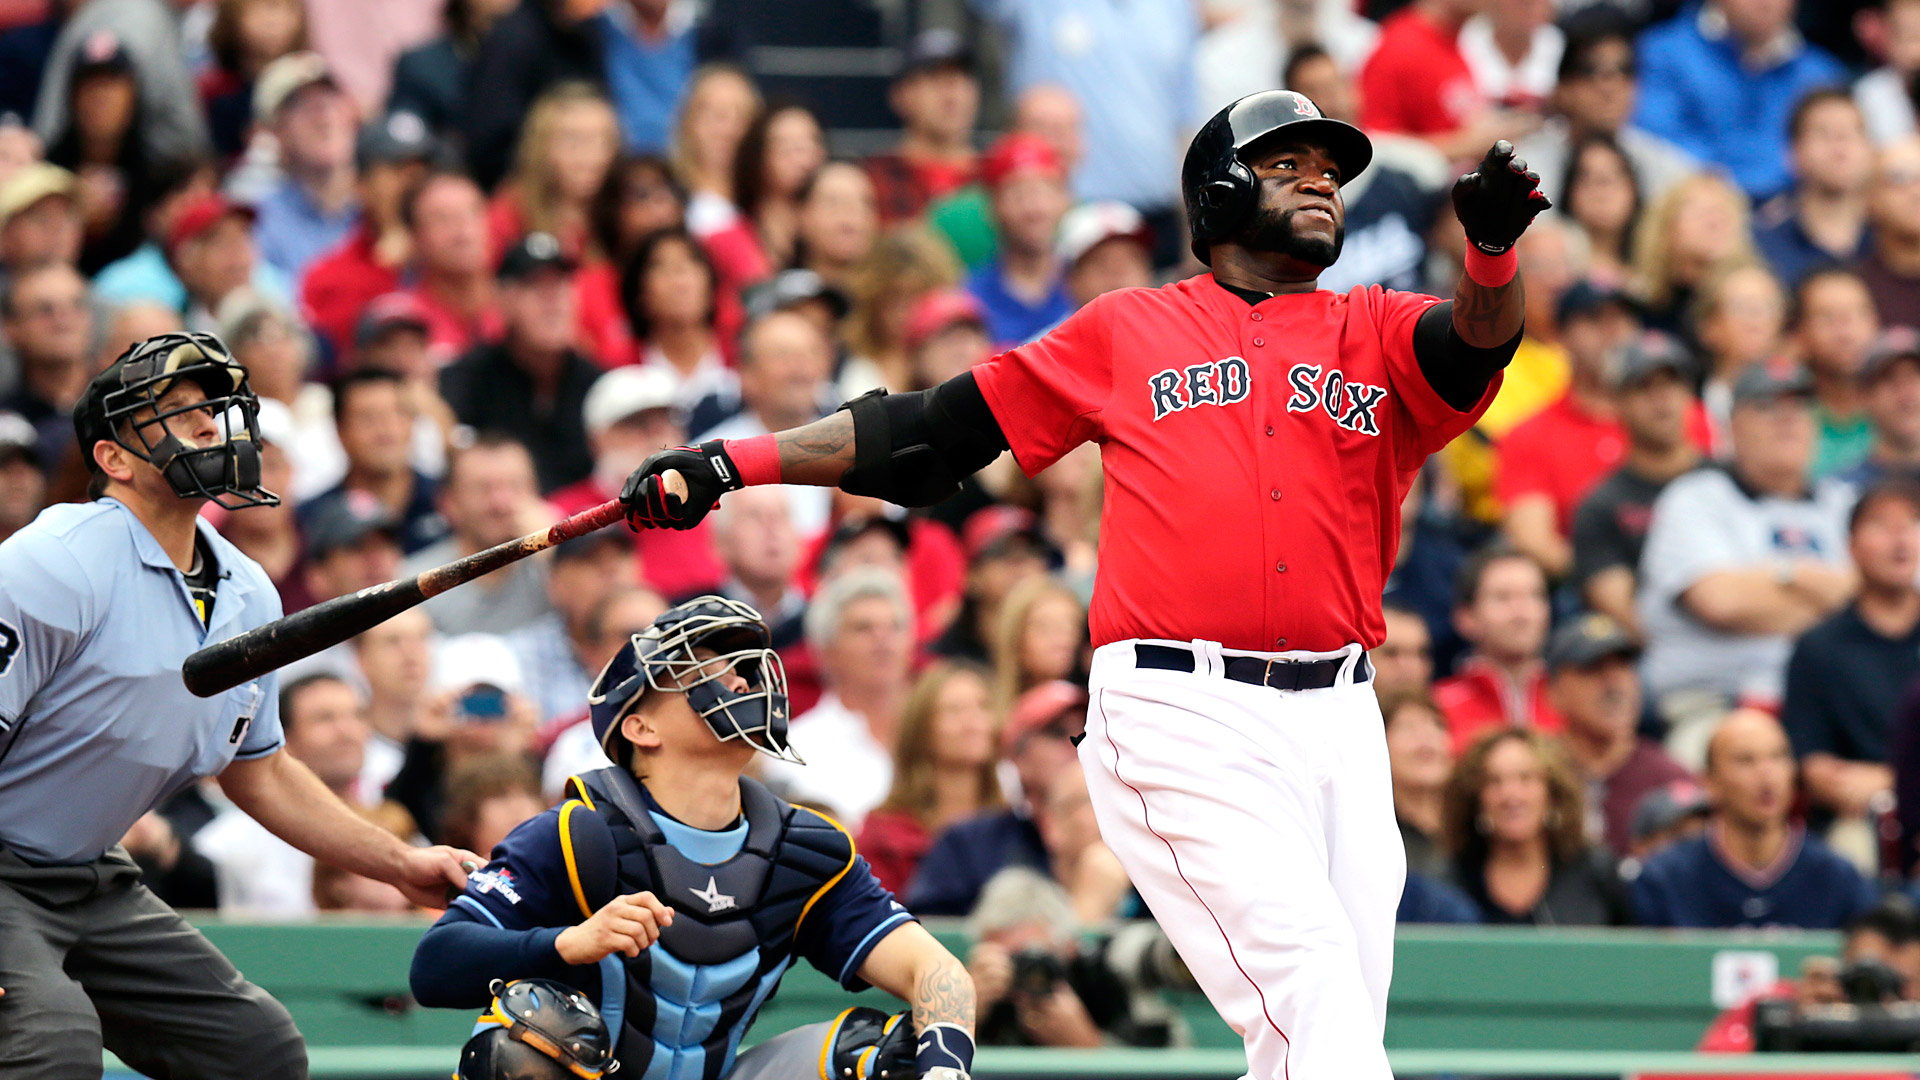 Red Sox great David Ortiz: Yankees to blame for failed PED test leak 